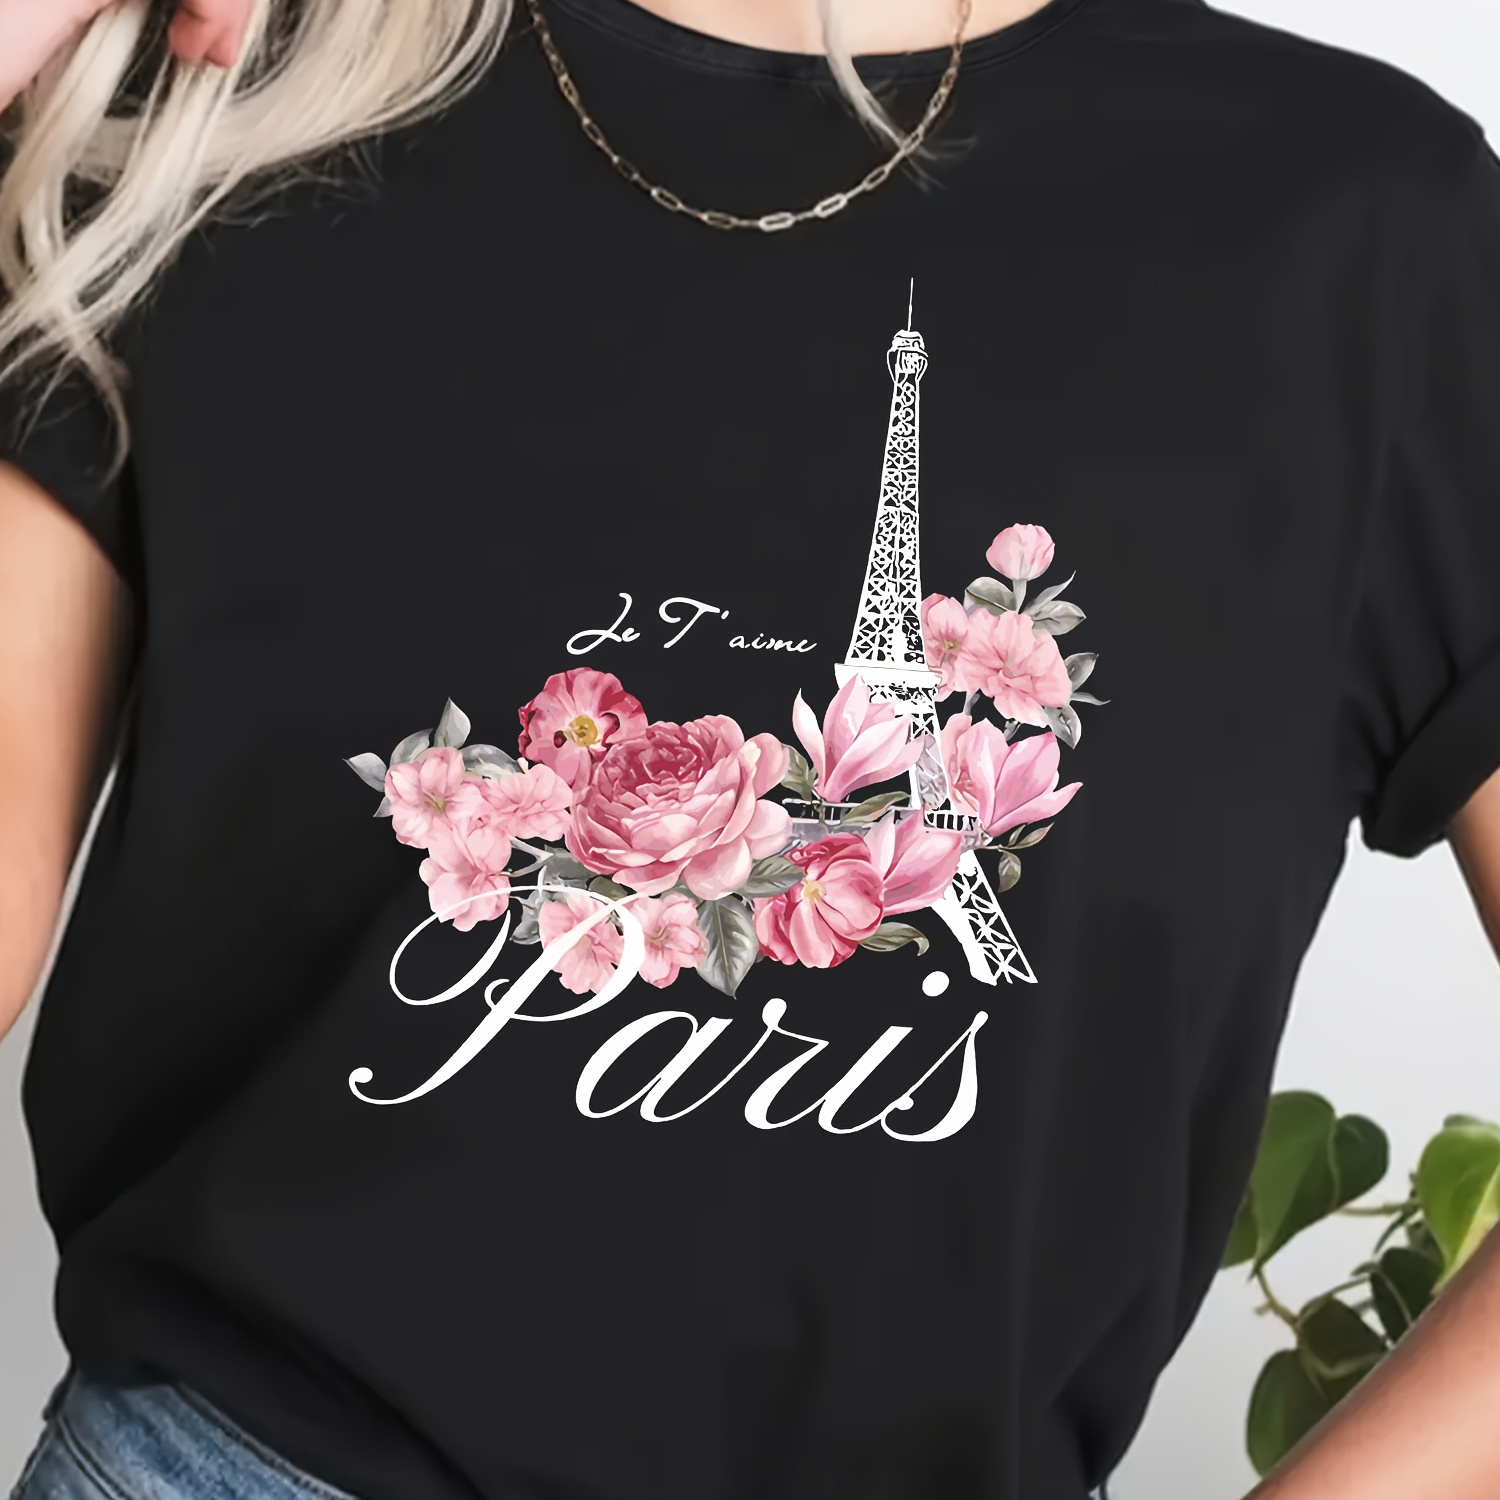 

Eiffel Tower Print T-shirt, Short Sleeve Crew Neck Casual Top For Summer & Spring, Women's Clothing